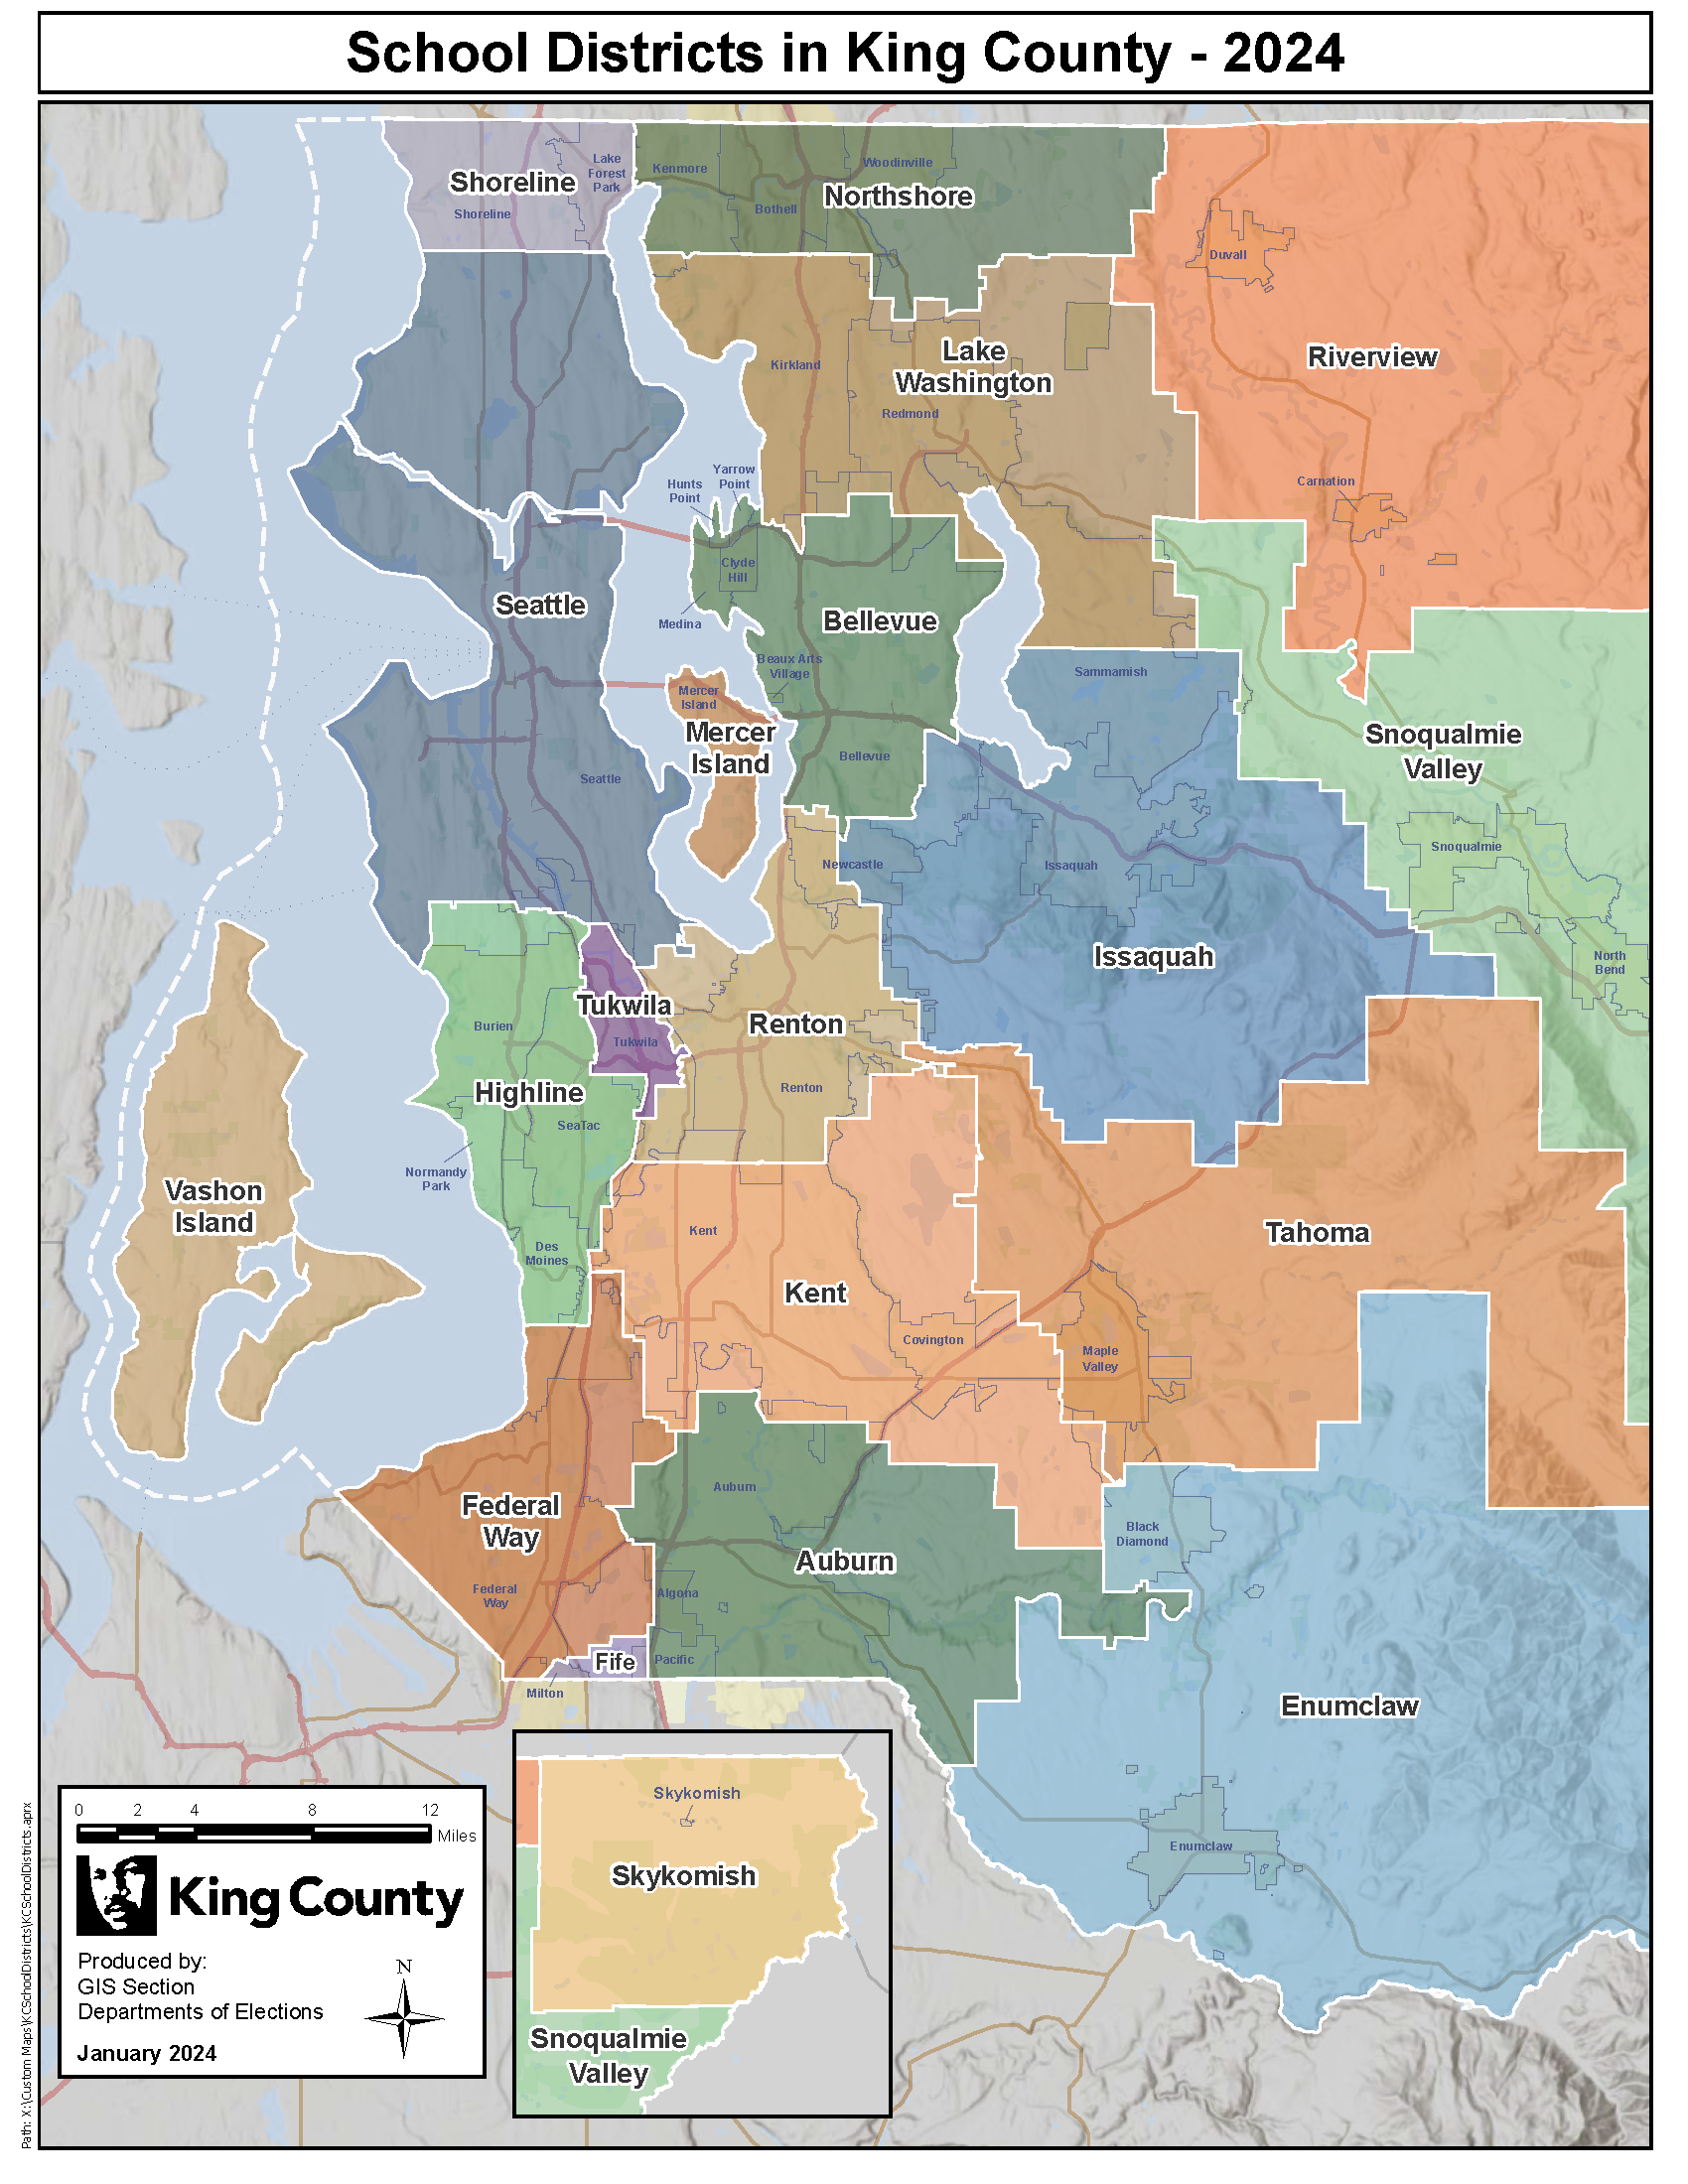 Image: Map of King County School Districts